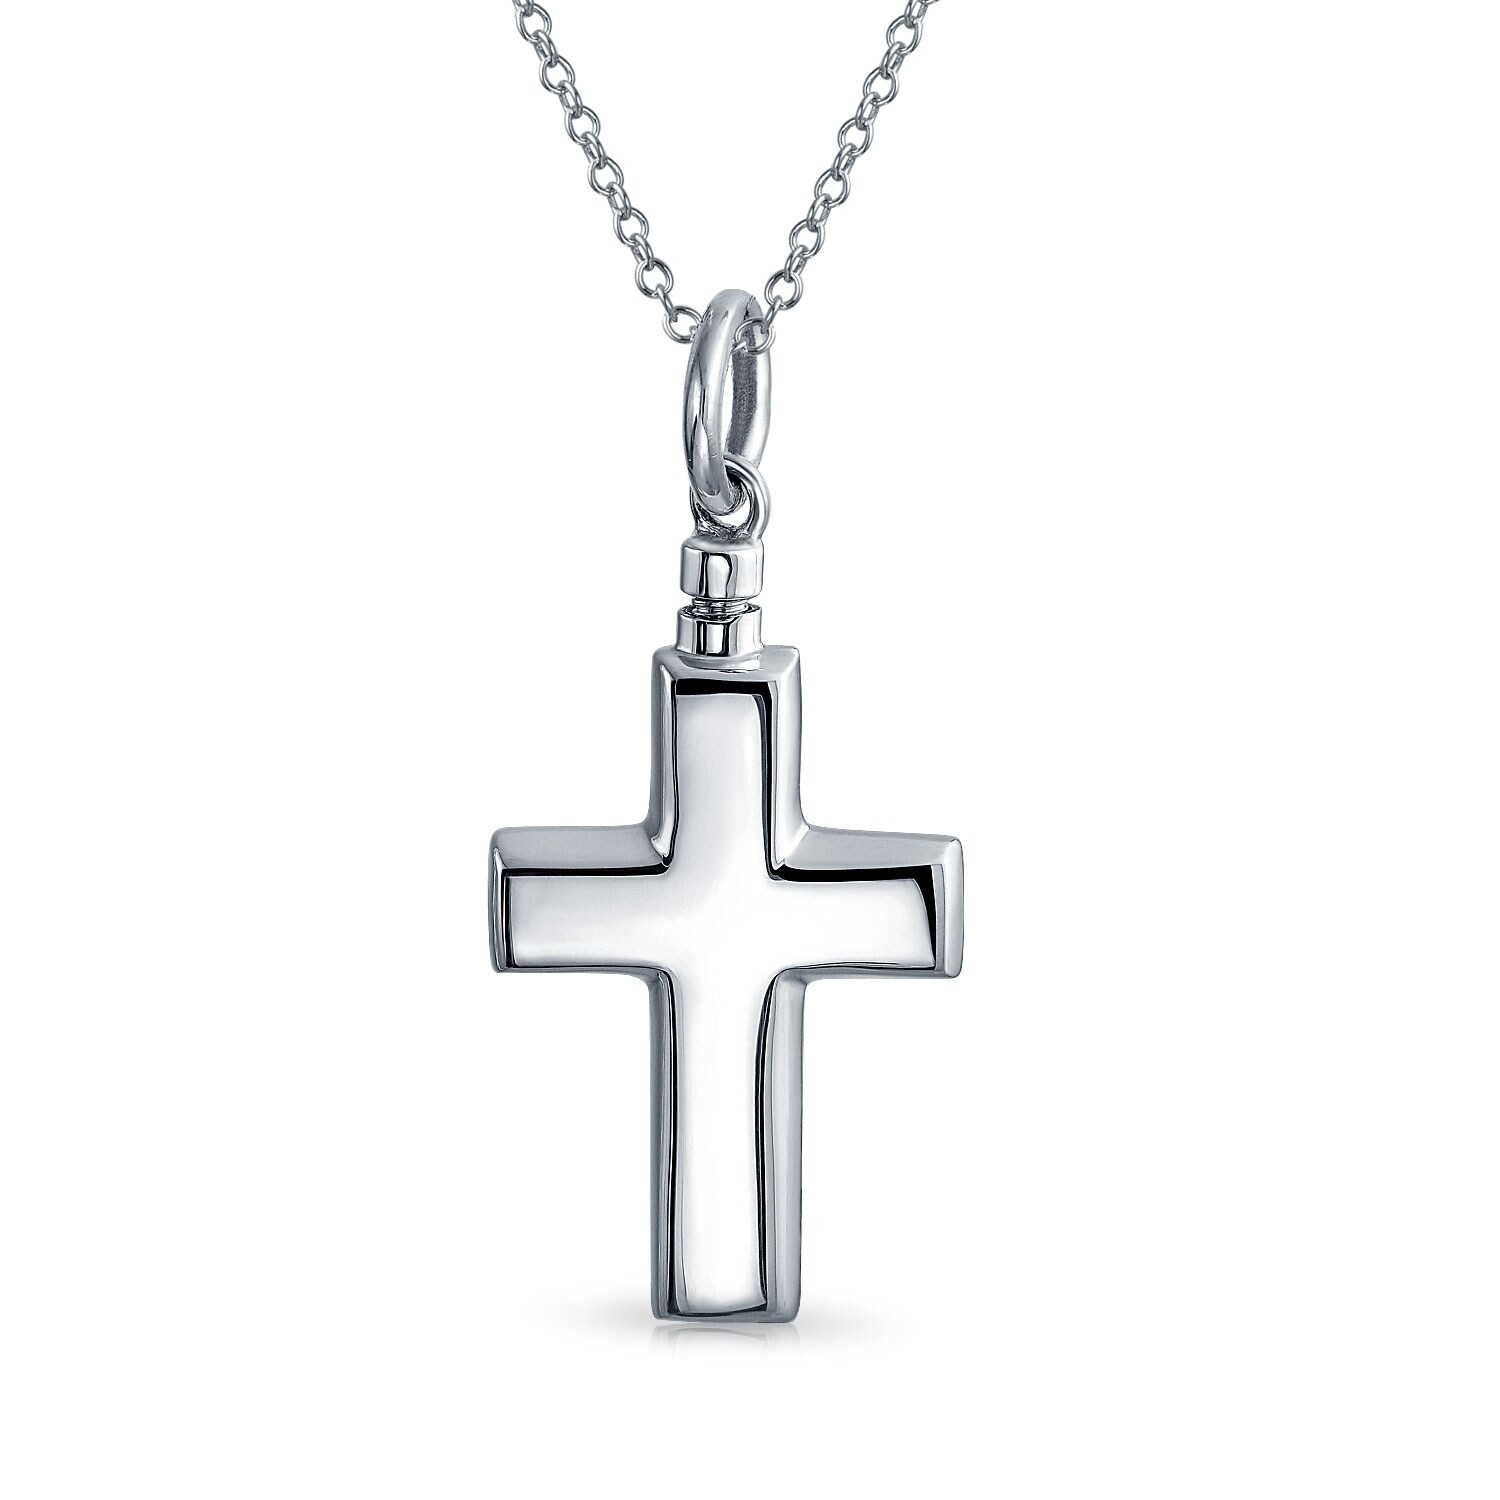 Blank Cross Cremation Memorial Urn Ashes Holder Necklace Pendant Jewelry Simple